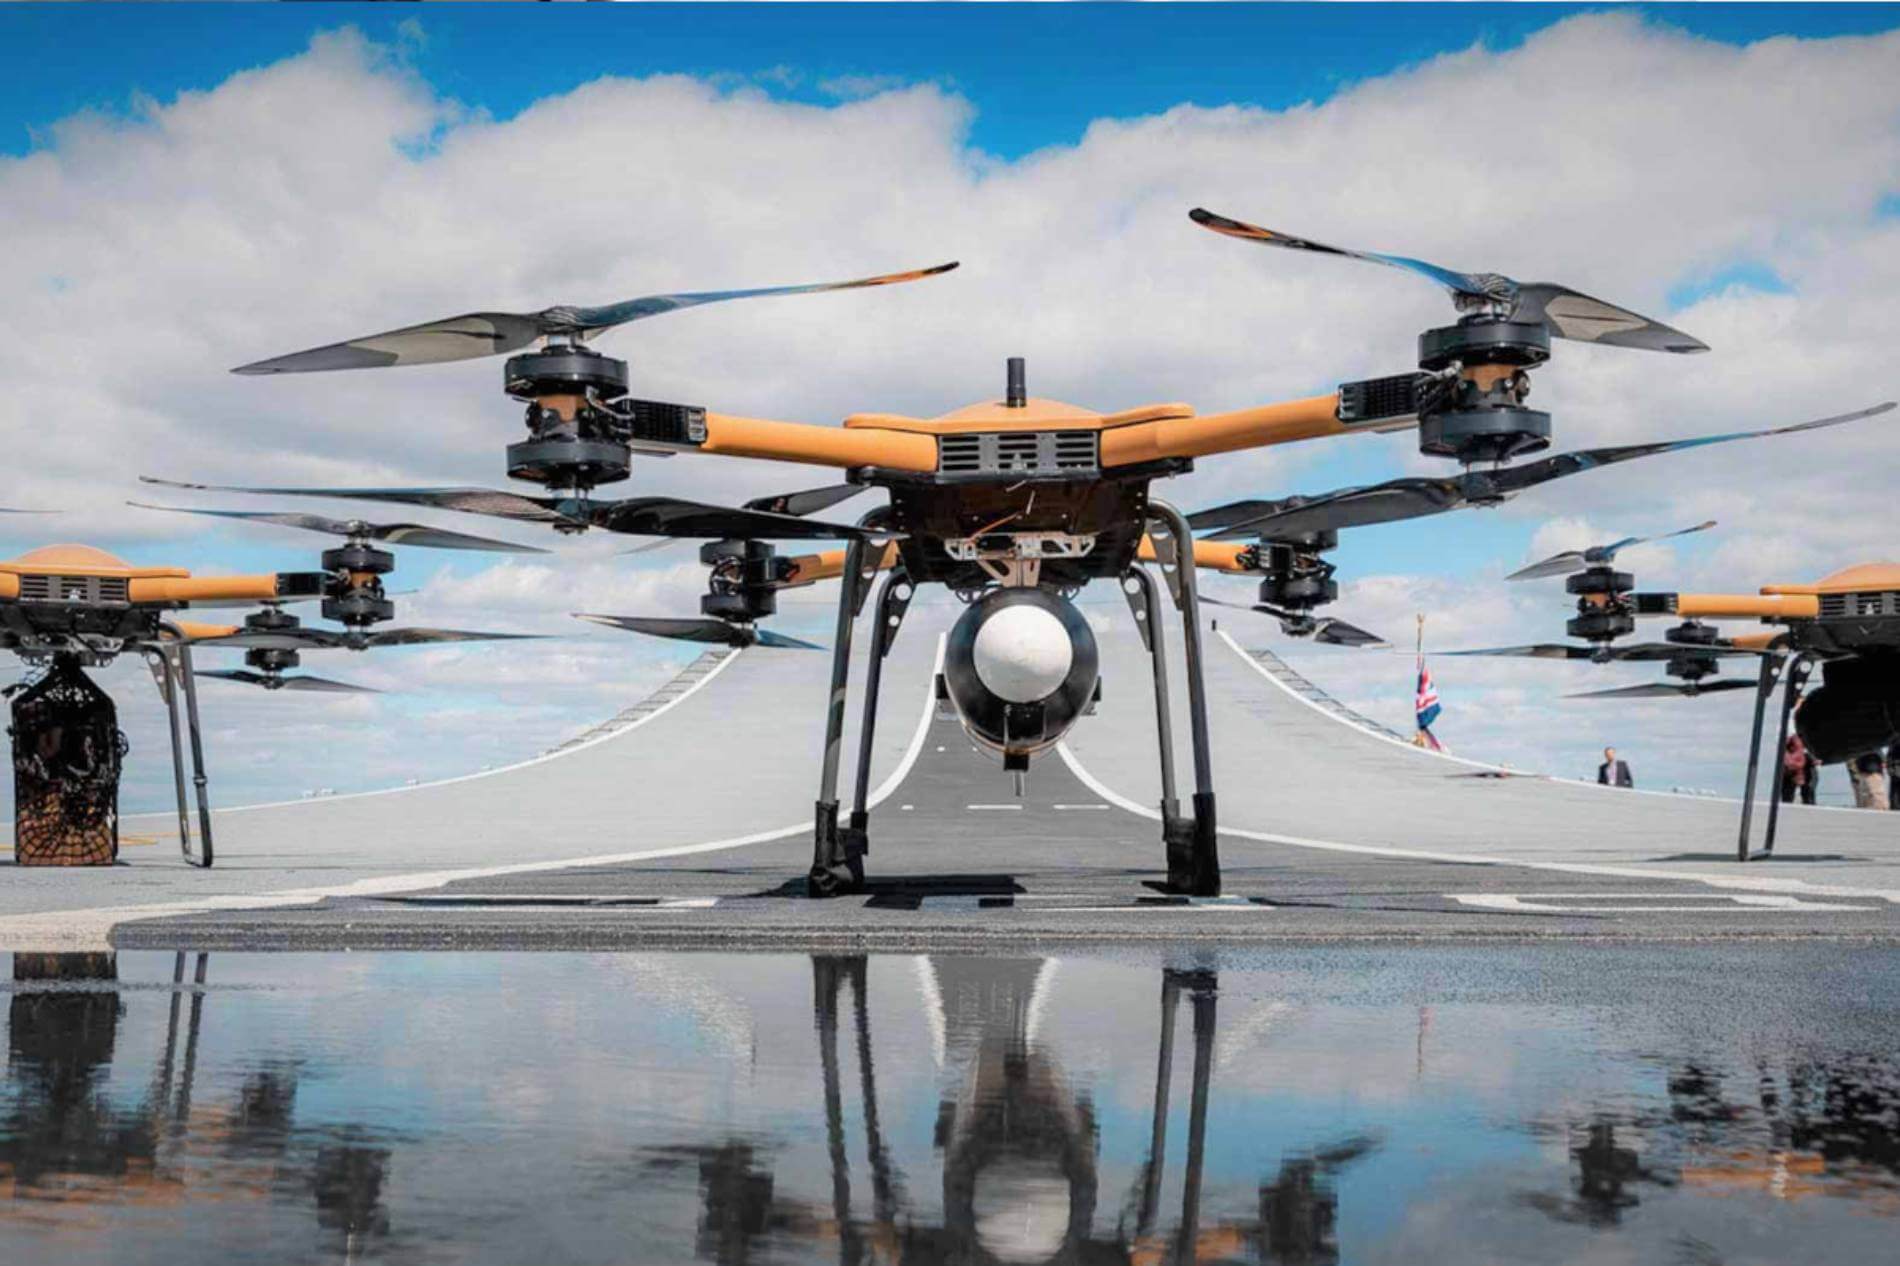 UK invests £12,000,000 to create aerial highway for drones as part of Skynet project